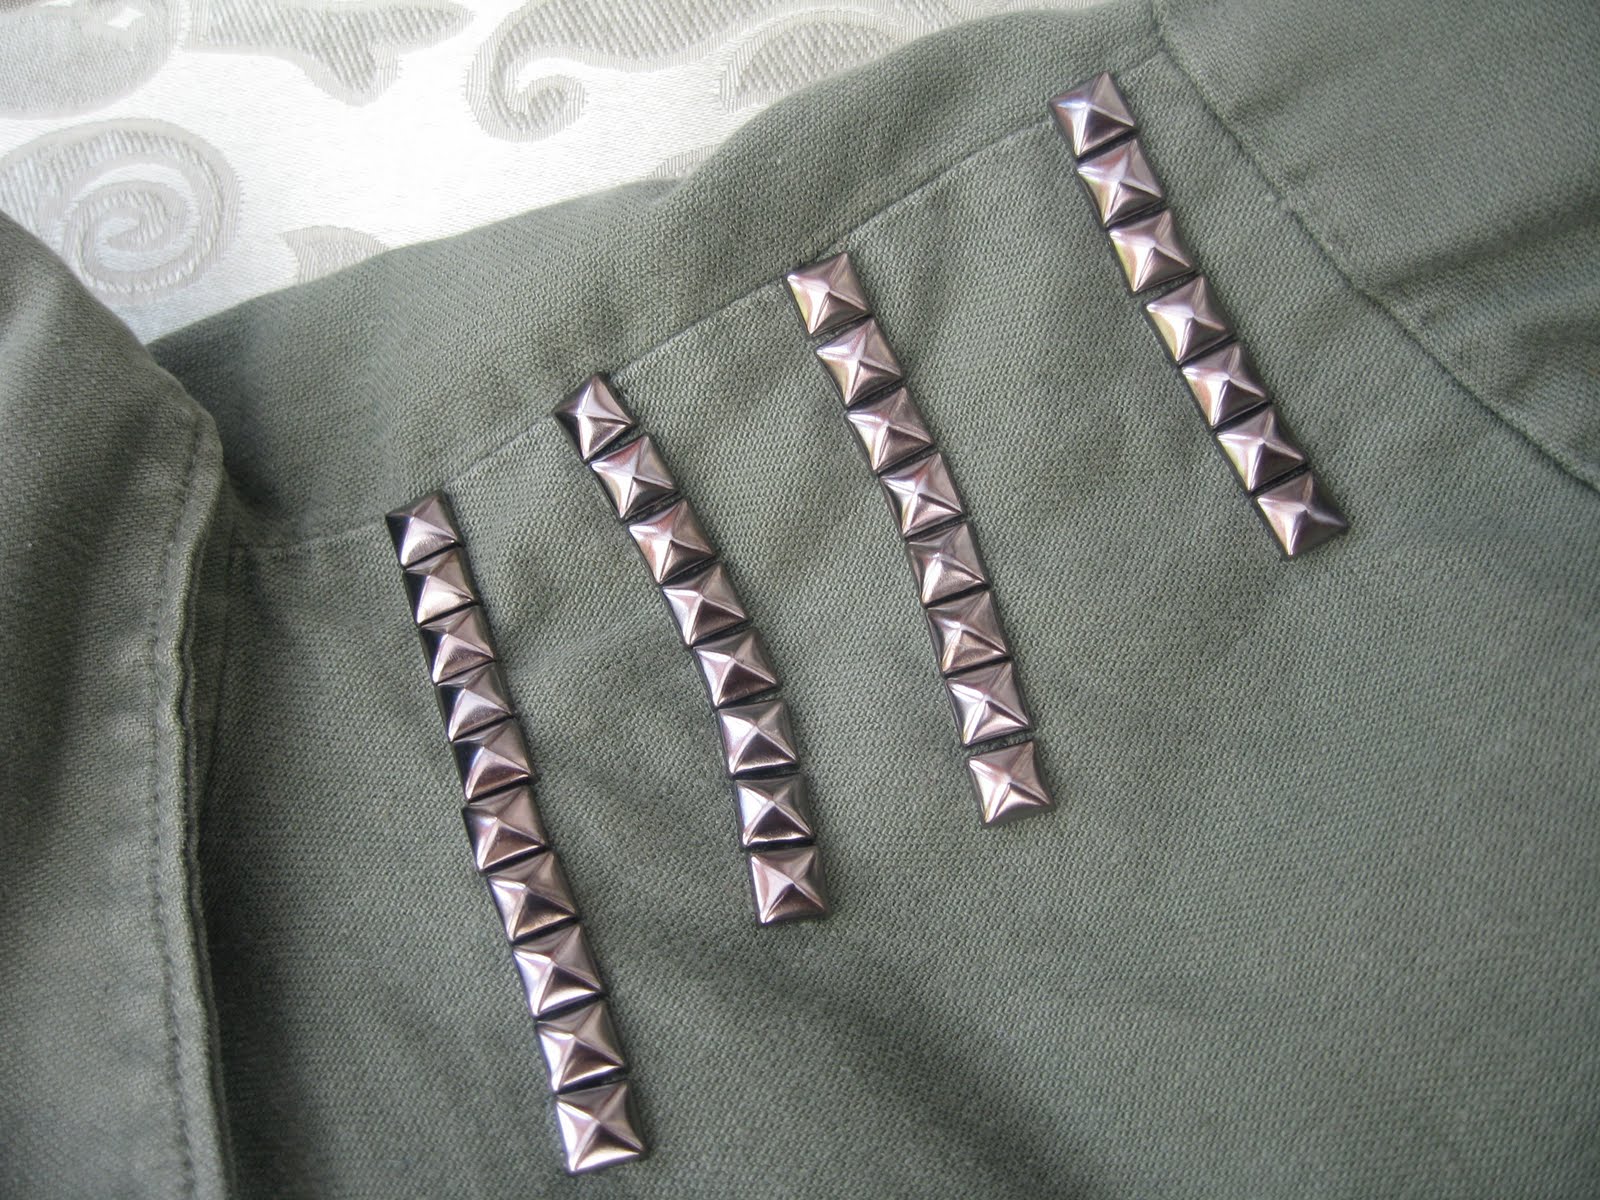 Five Minute Style: Let's Get Crafty: Studded Army Jacket Take Two